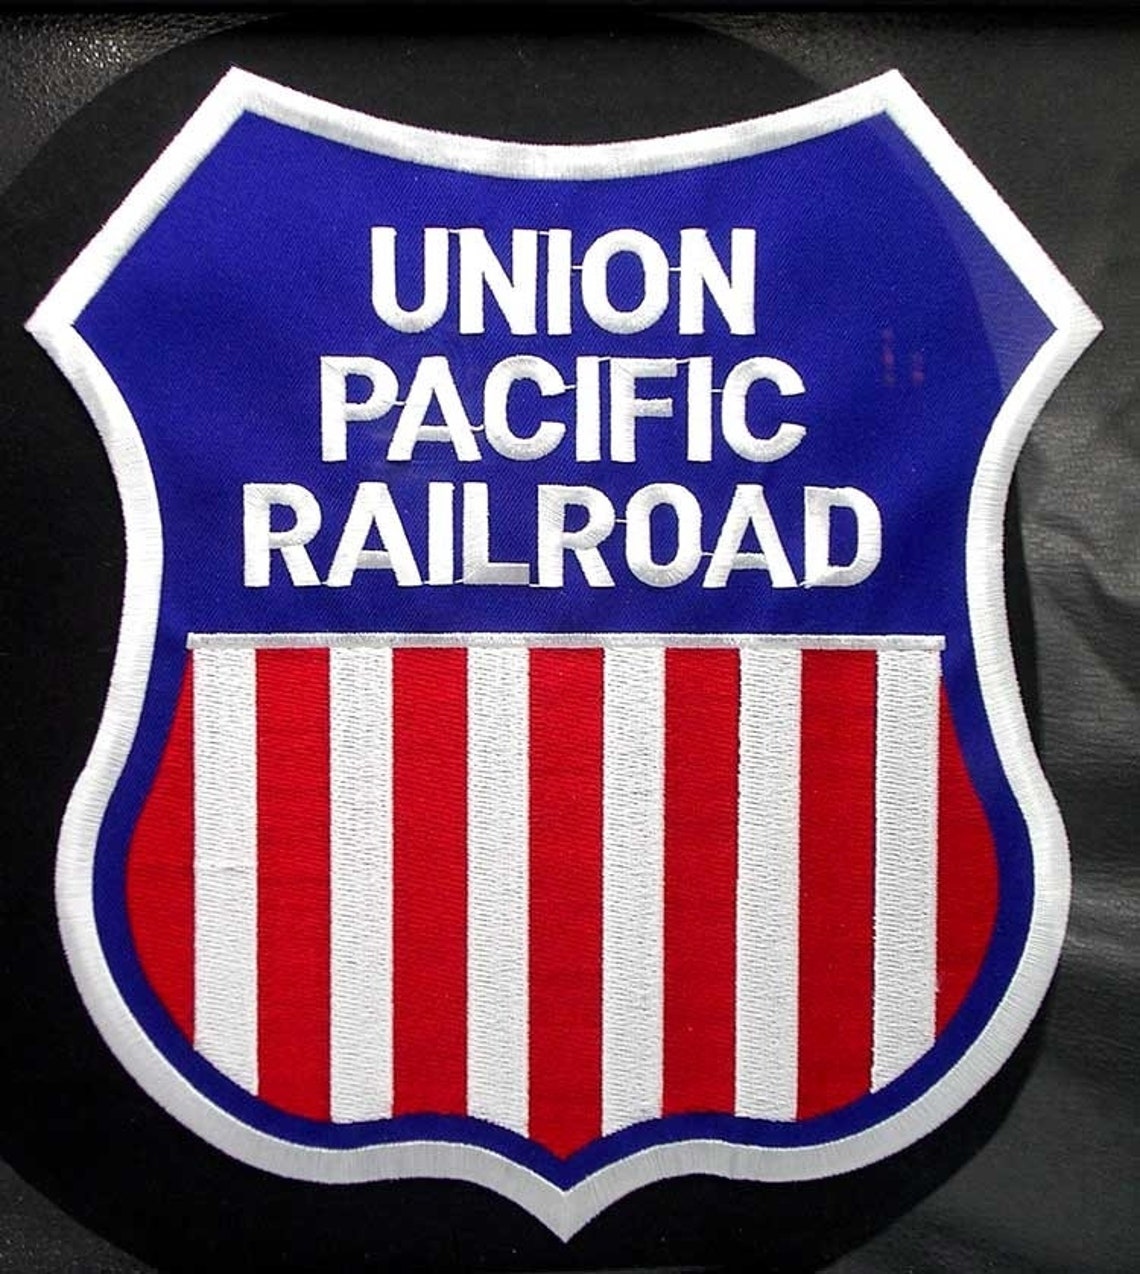 UNION PACIFIC RAILROAD Extra Large Embroidered Cloth Shield | Etsy